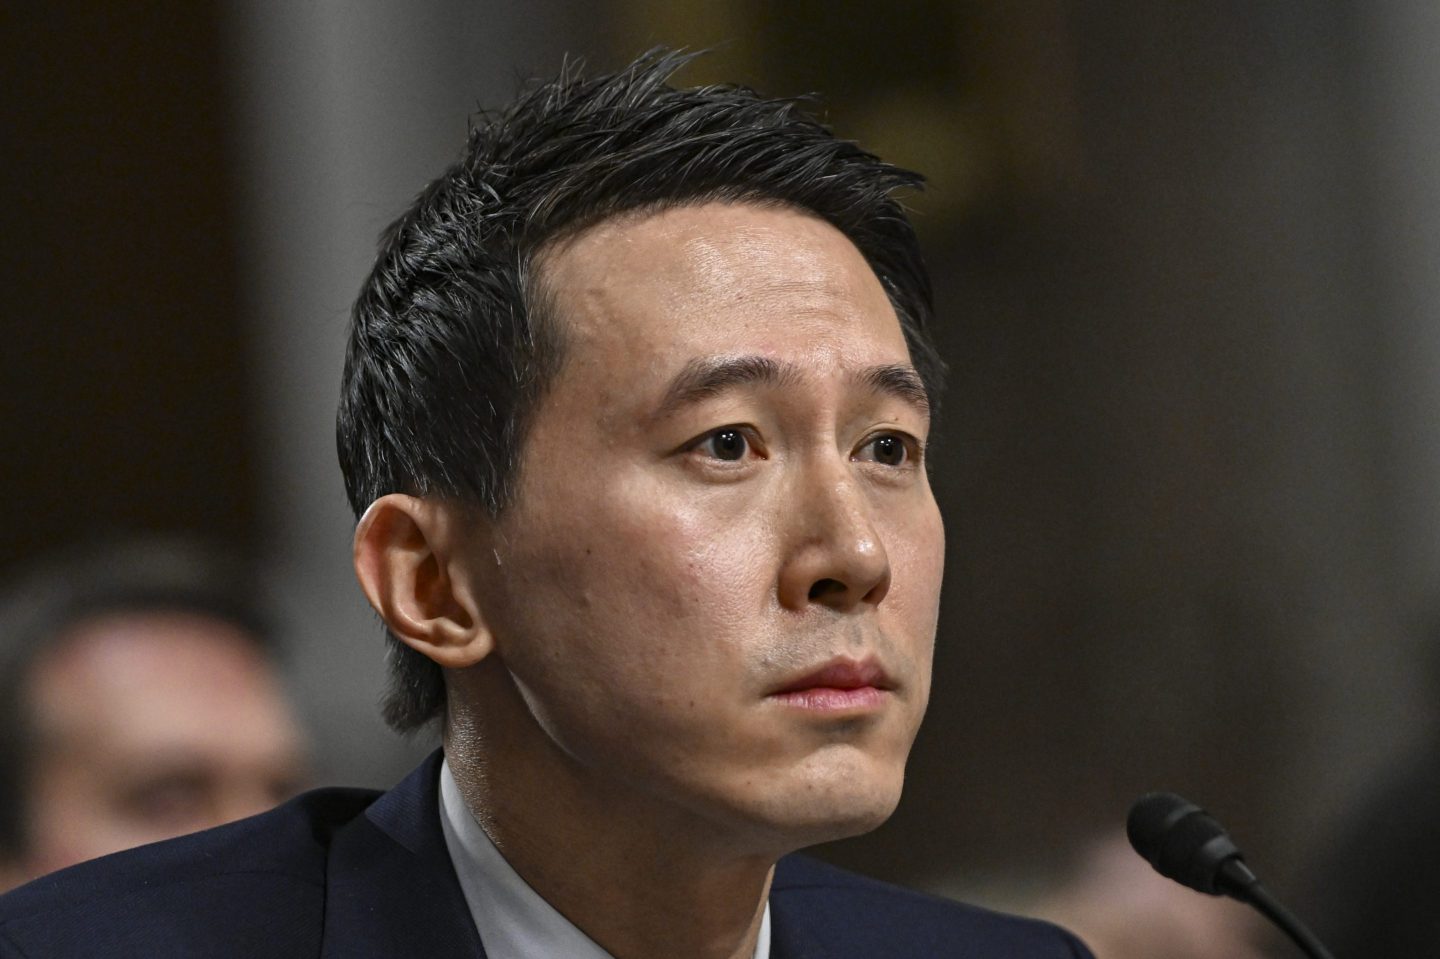 WASHINGTON DC, UNITED STATES &#8211; JANUARY 31: Chief executive officer (CEO) of TikTok Shou Zi Chew testify before a Senate Judiciary Committee hearing on online child sexual exploitation in the Dirksen Senate Office Building on Capitol Hill on January 31, 2024, in Washington, DC. (Photo by Celal Gunes/Anadolu via Getty Images)